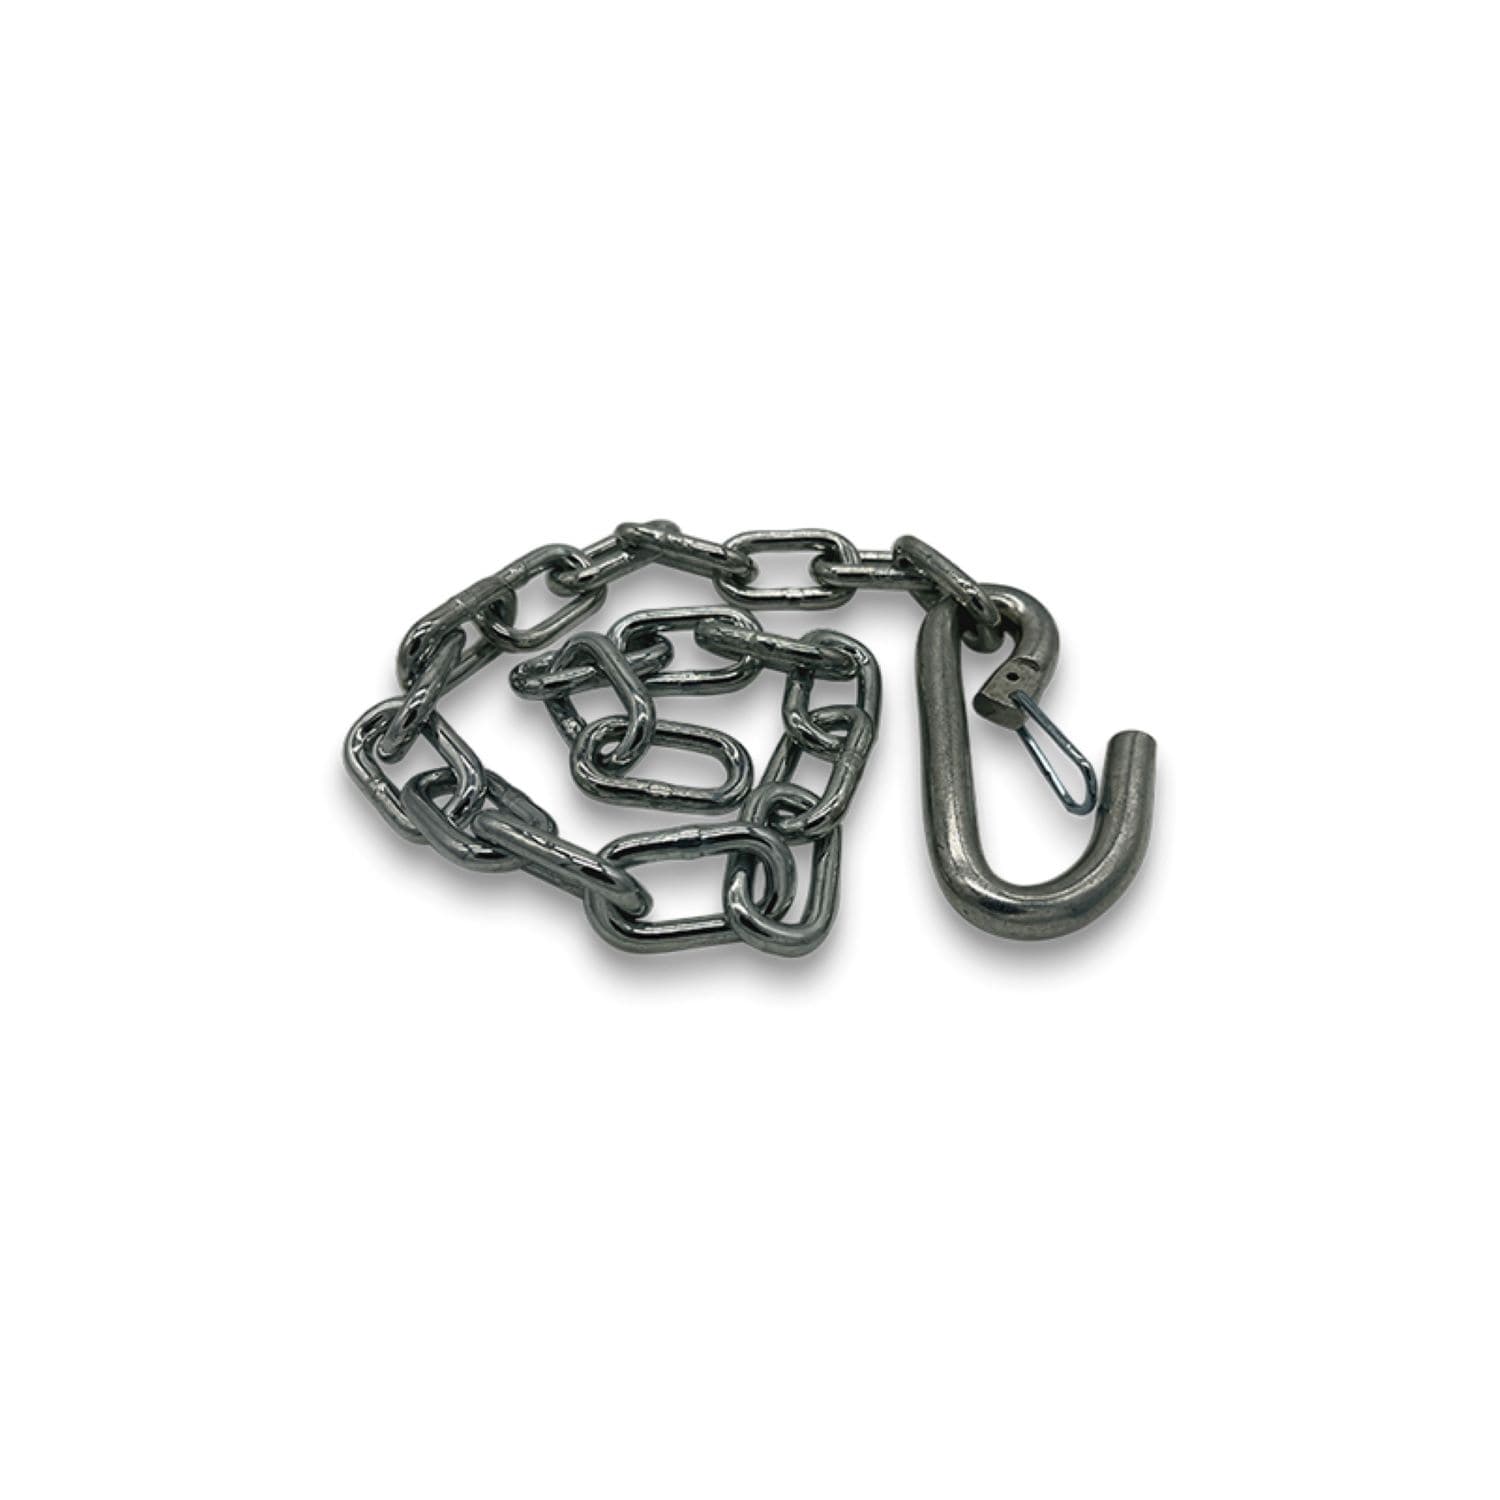 Libra 2 New 5/16 x 30 Grade 30 Trailer Safety Chains W/S Hook & Safety Latch - 25006